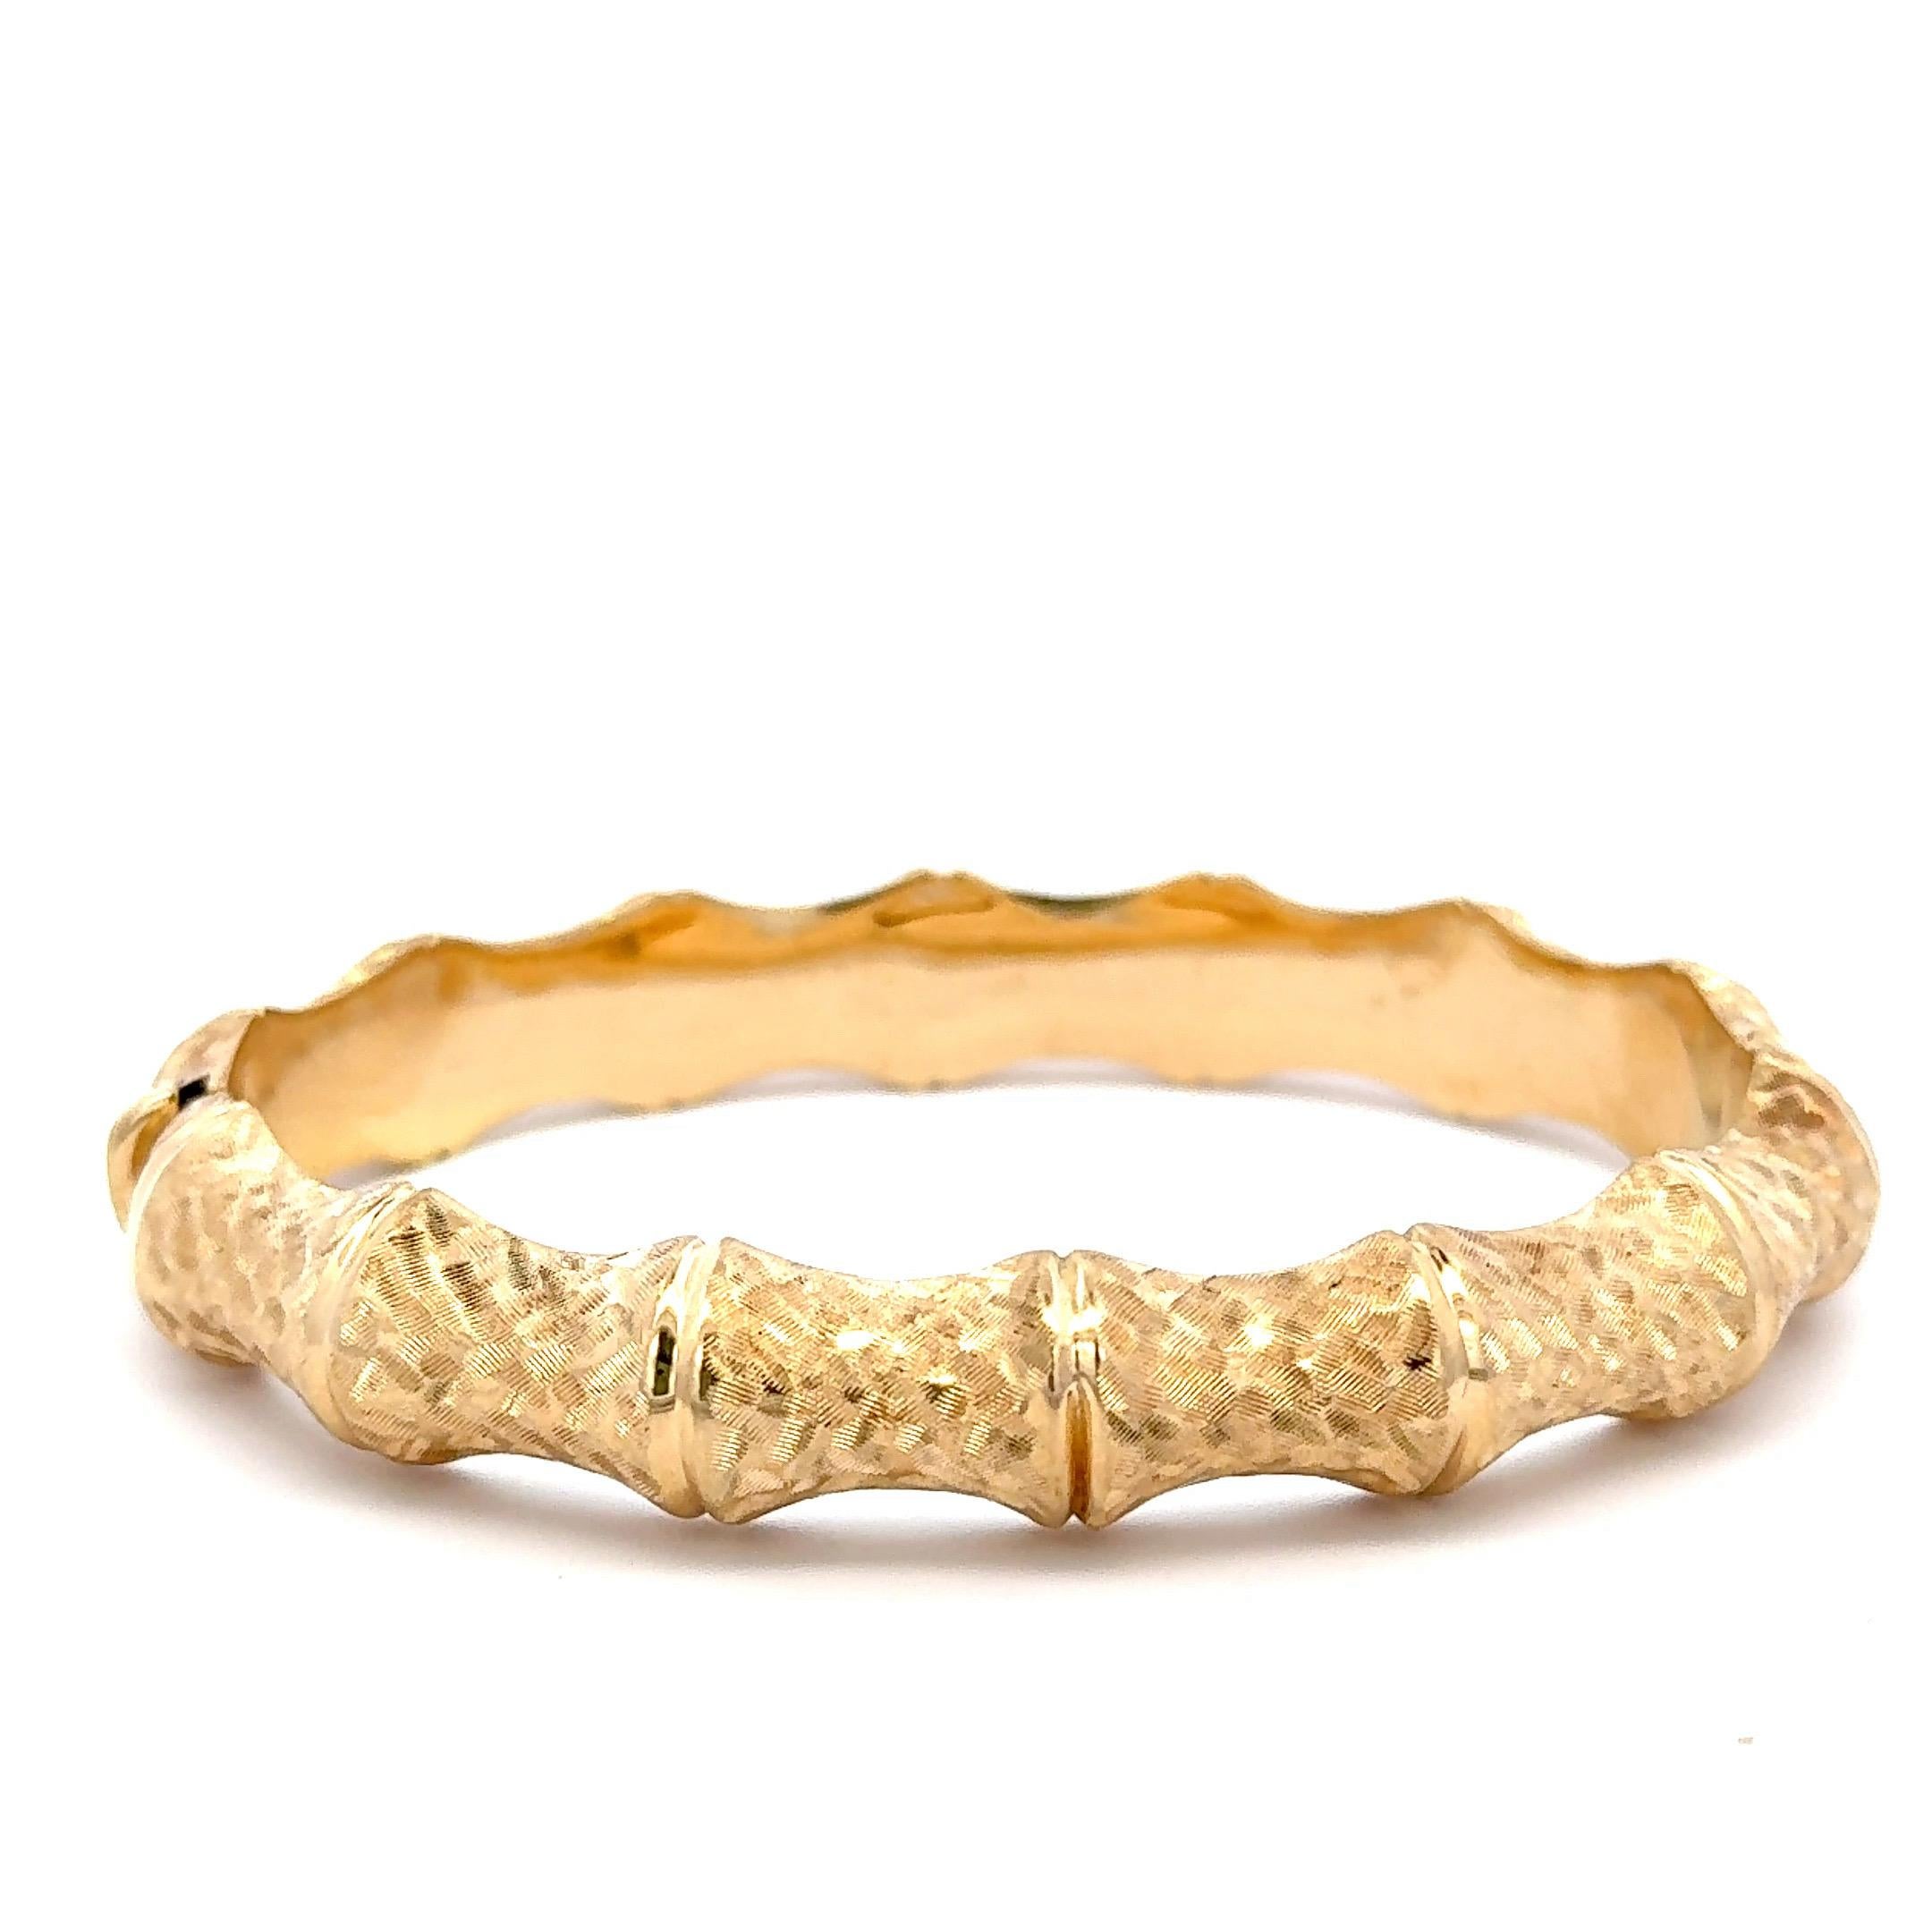 Made in Italy, this 14 karat yellow gold bangle features a bamboo motif weighing 17.1 grams. 
Fits a standard size wrist. 